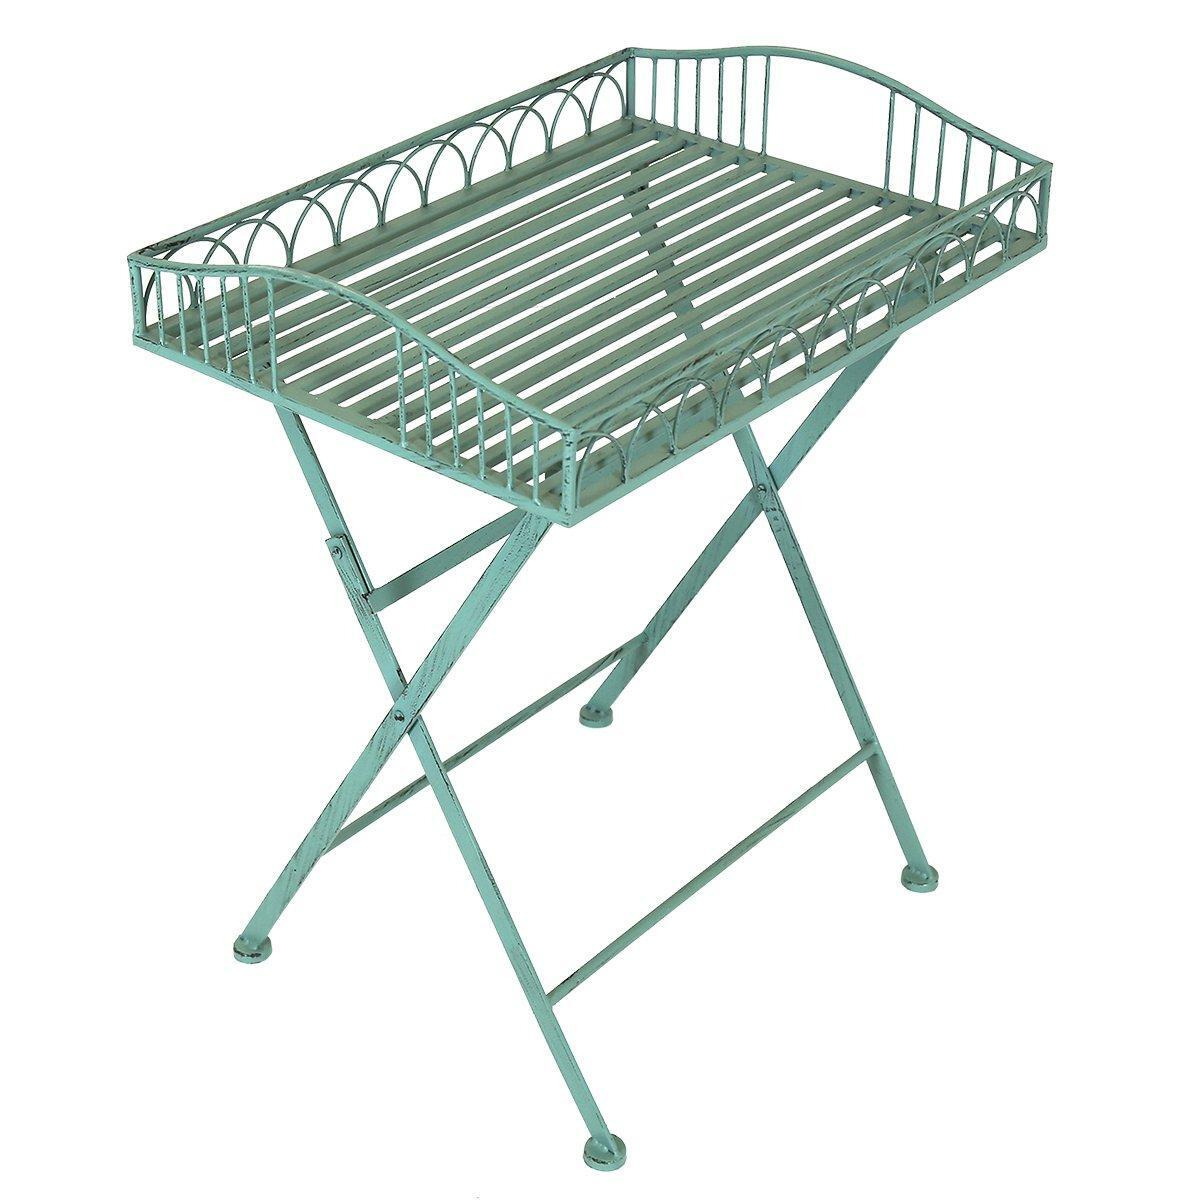 Wrought Decorative Iron Garden Side Table - Sage Green - image 1